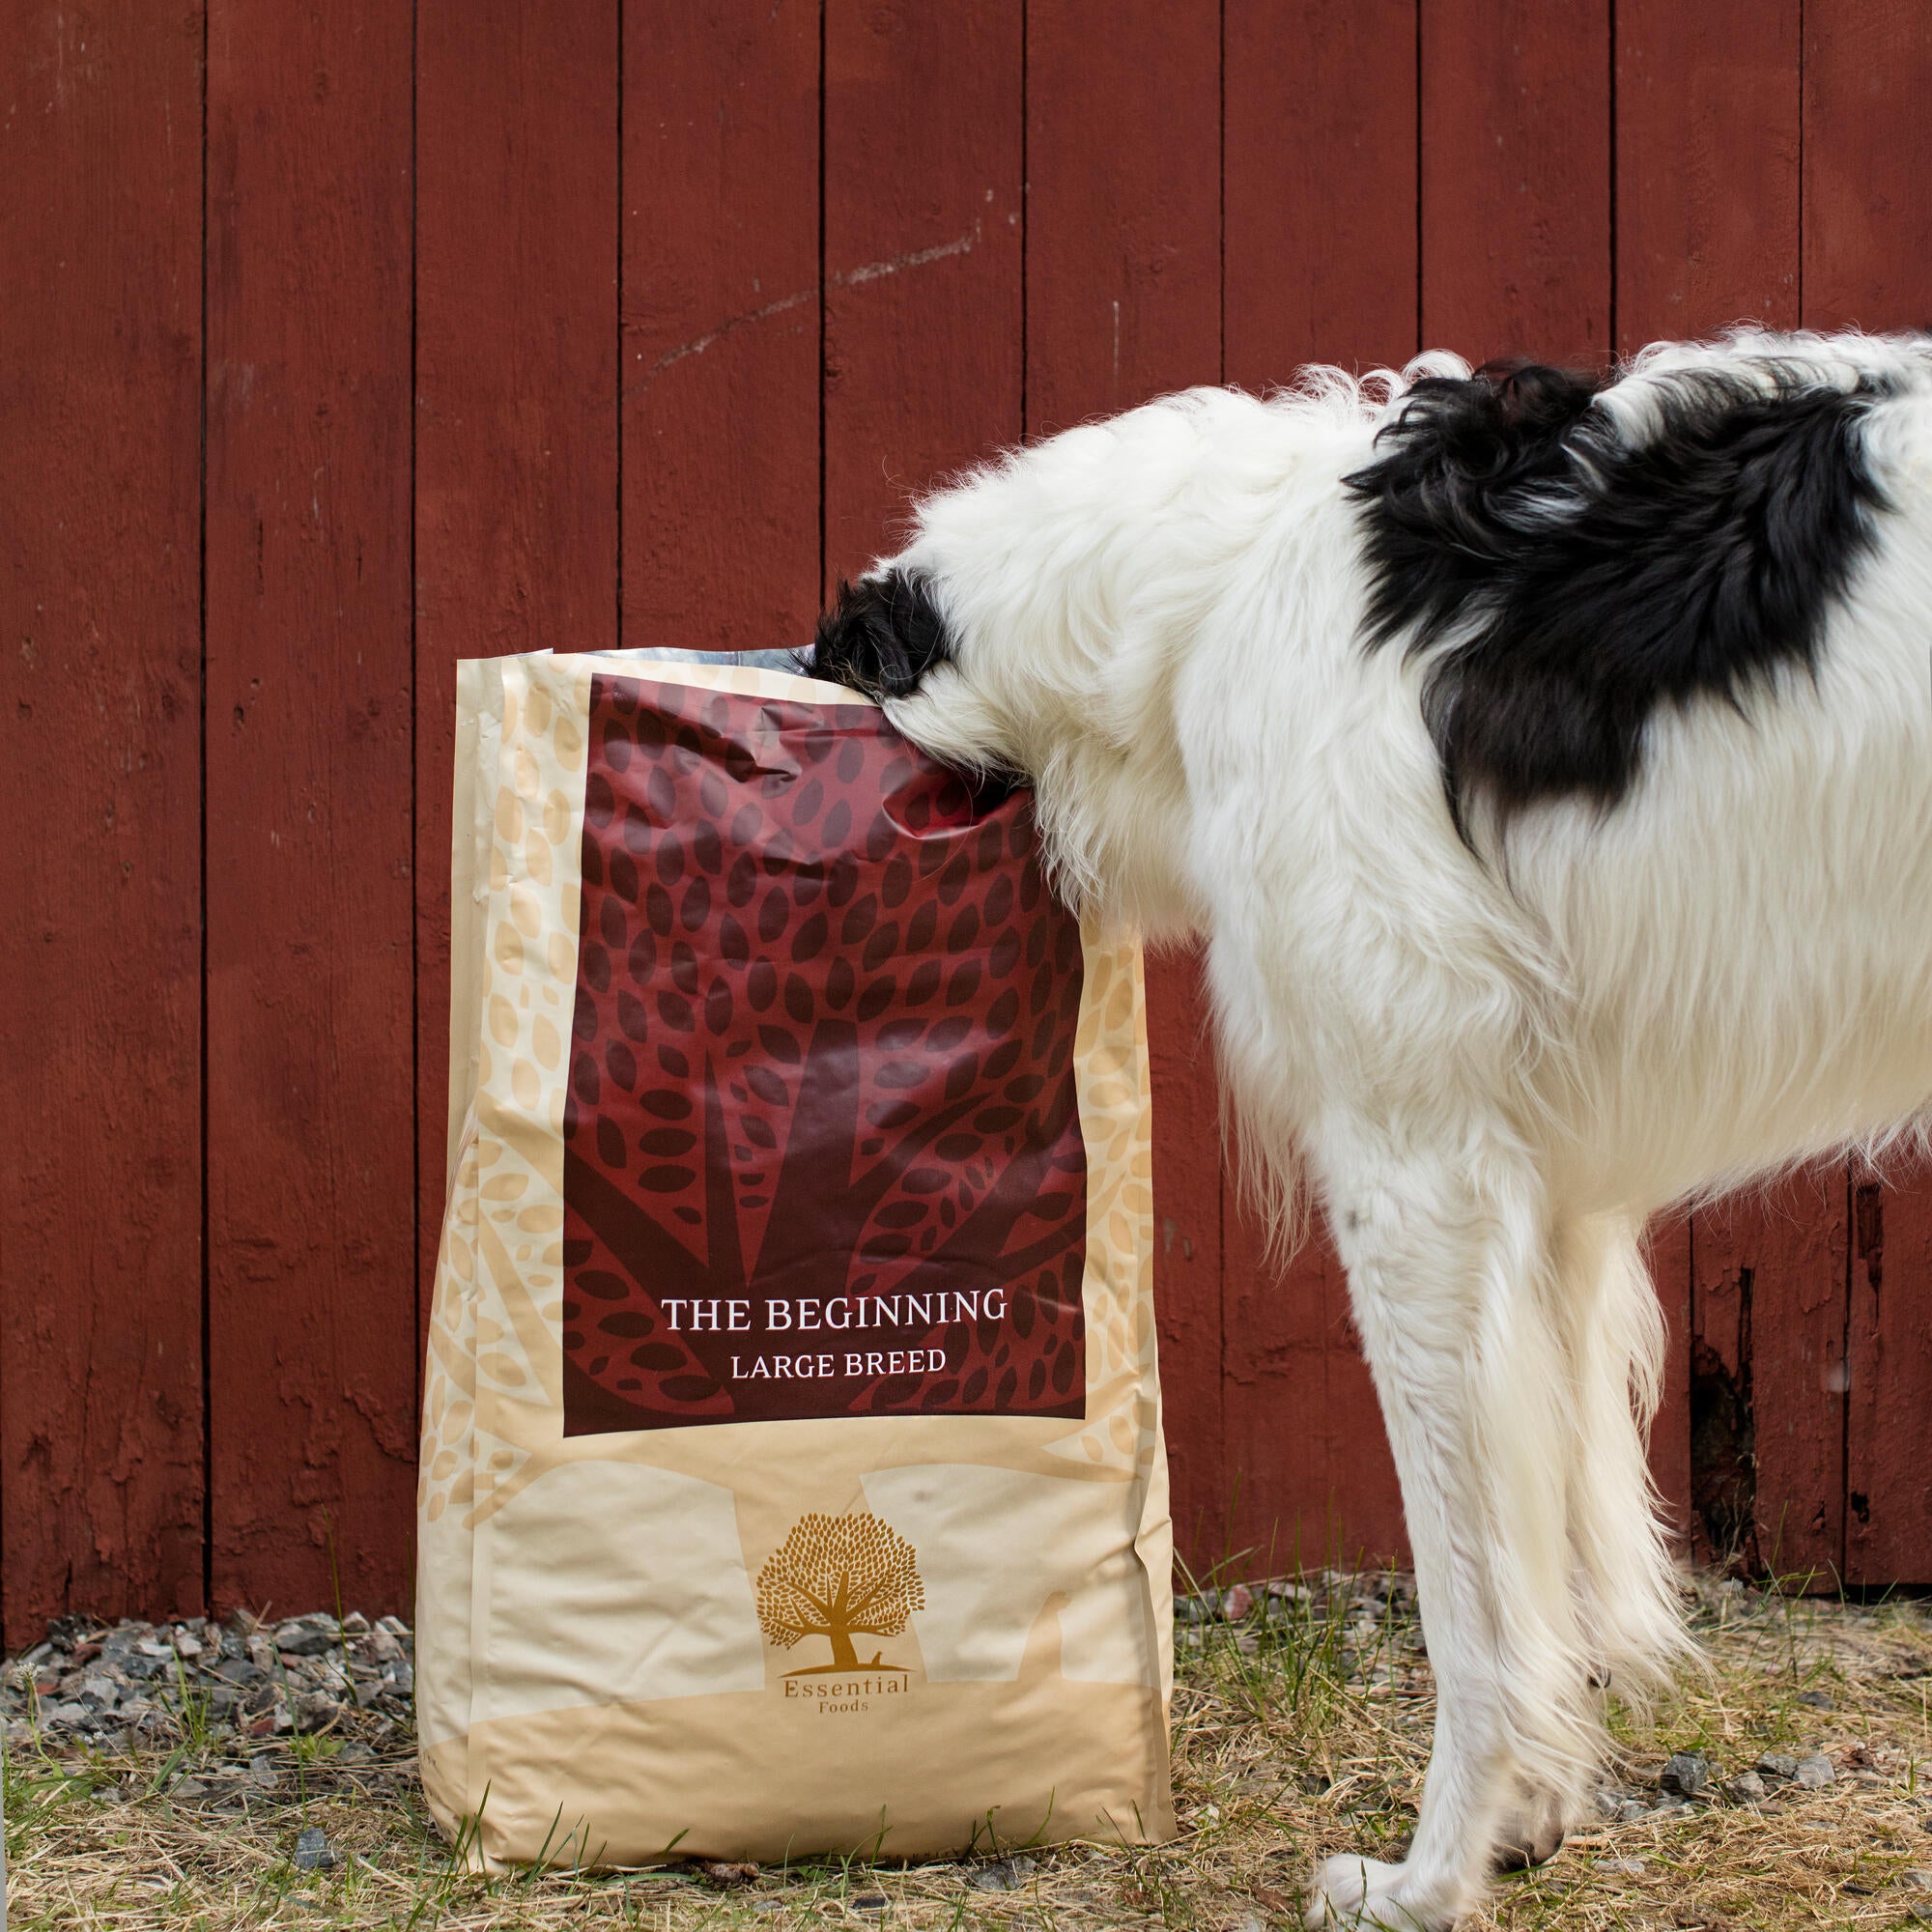 74% meat duck, chicken, salmon, trout, eggs Super premium grainless feed for puppies of large breeds The BEGINNING-LARGE BREED